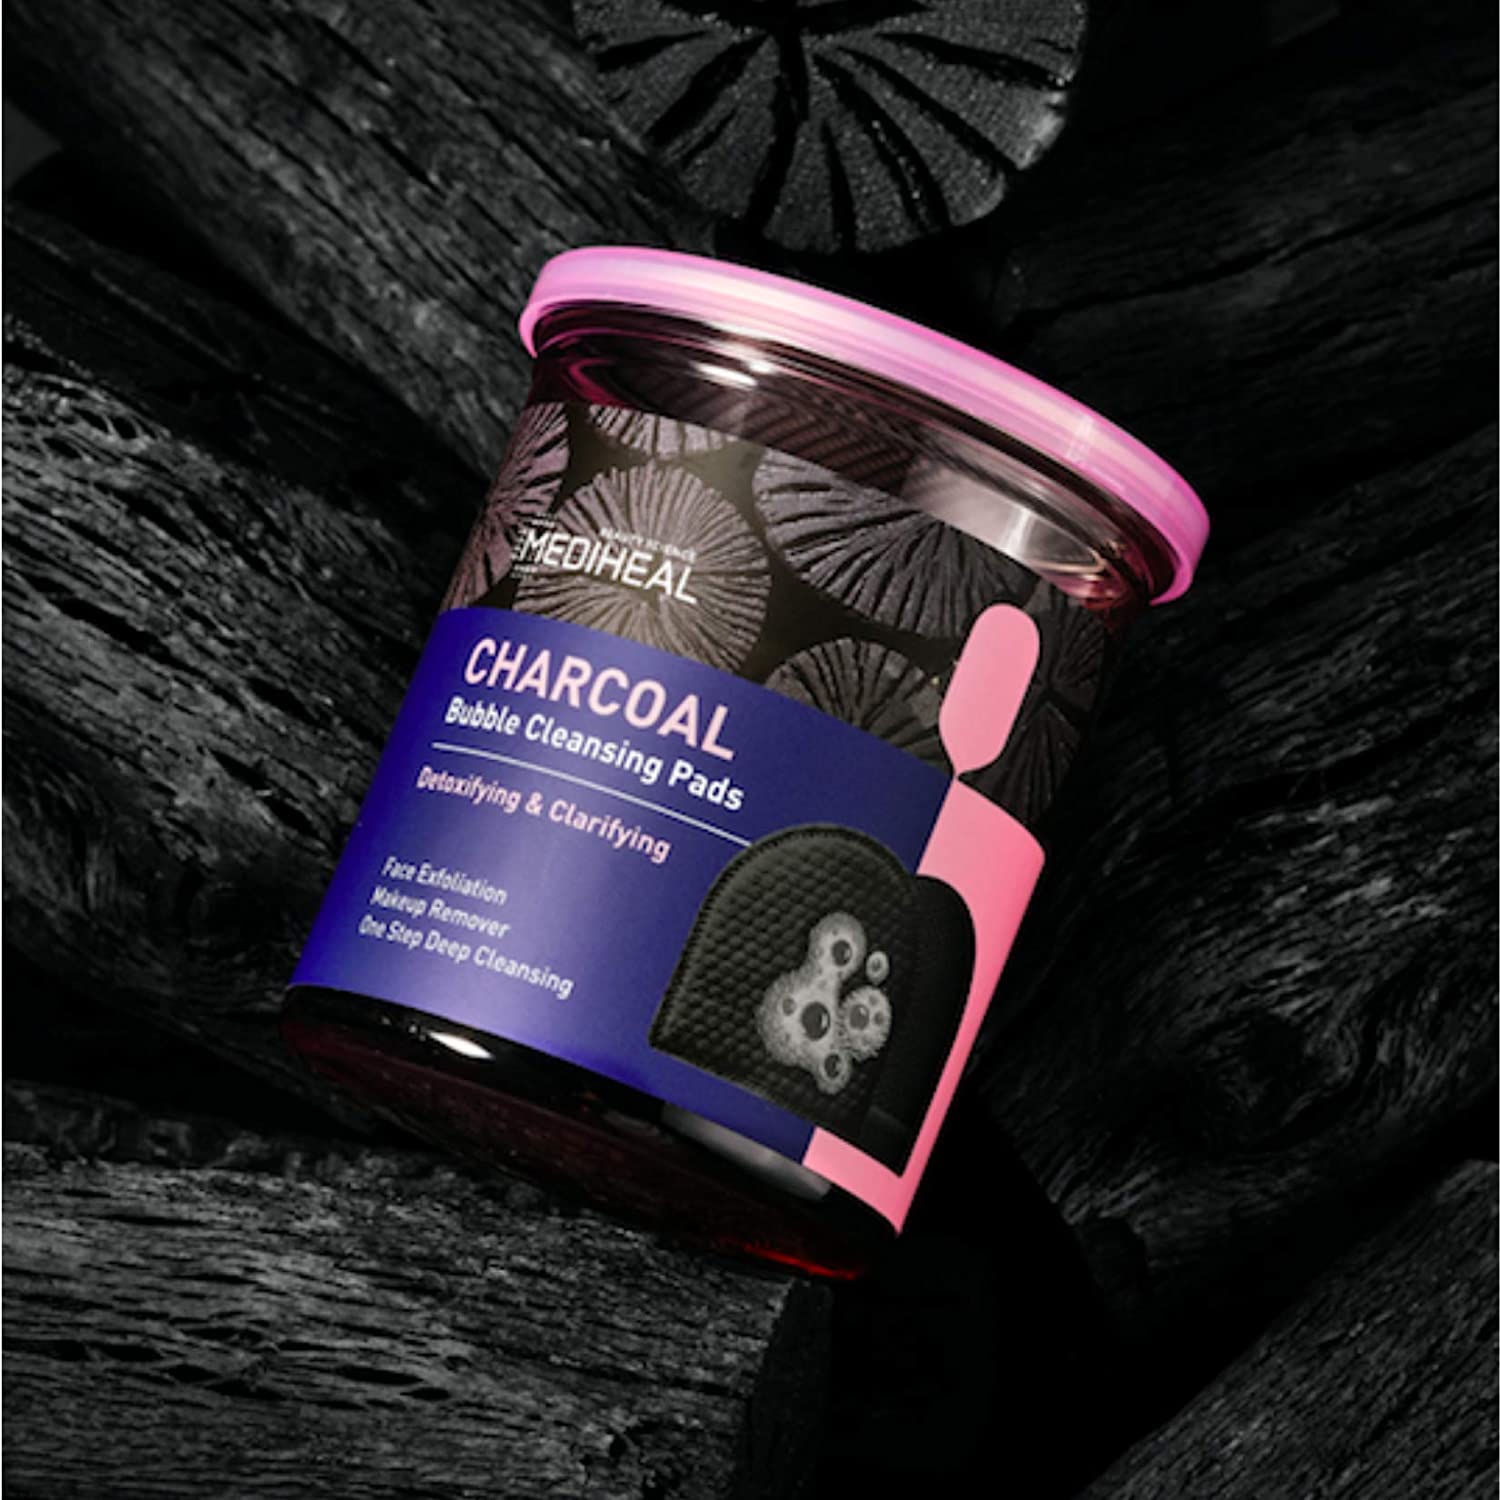 Mediheal Charcoal Bubble Cleansing Pads Facial Cleansers Meidheal   